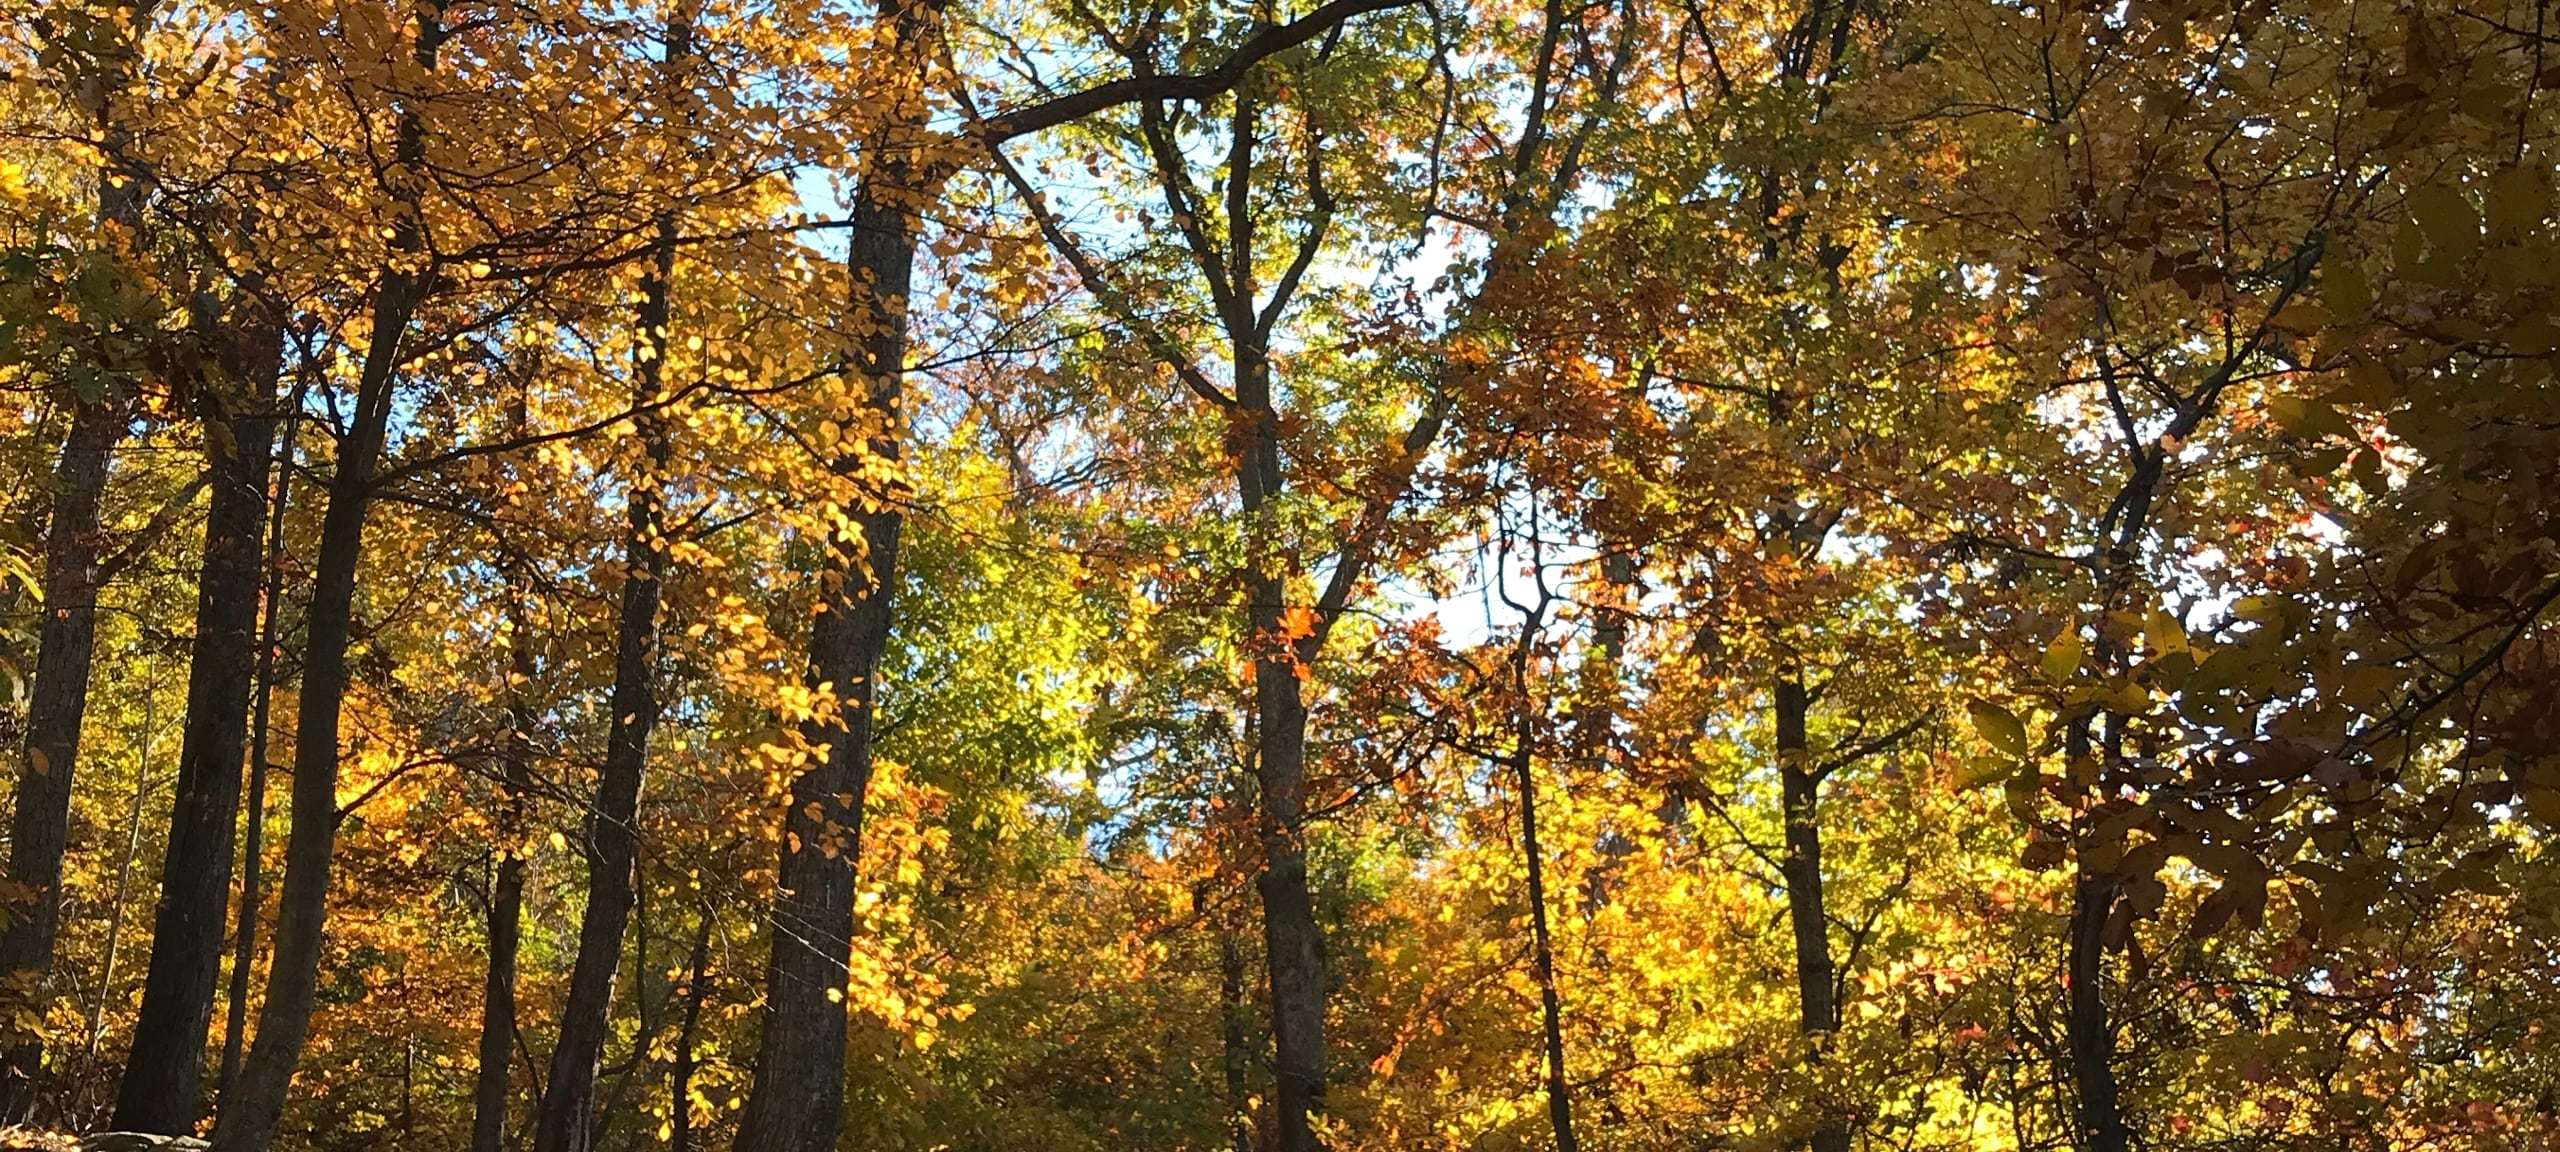 Autumn trees in Baltimore County, Maryland park